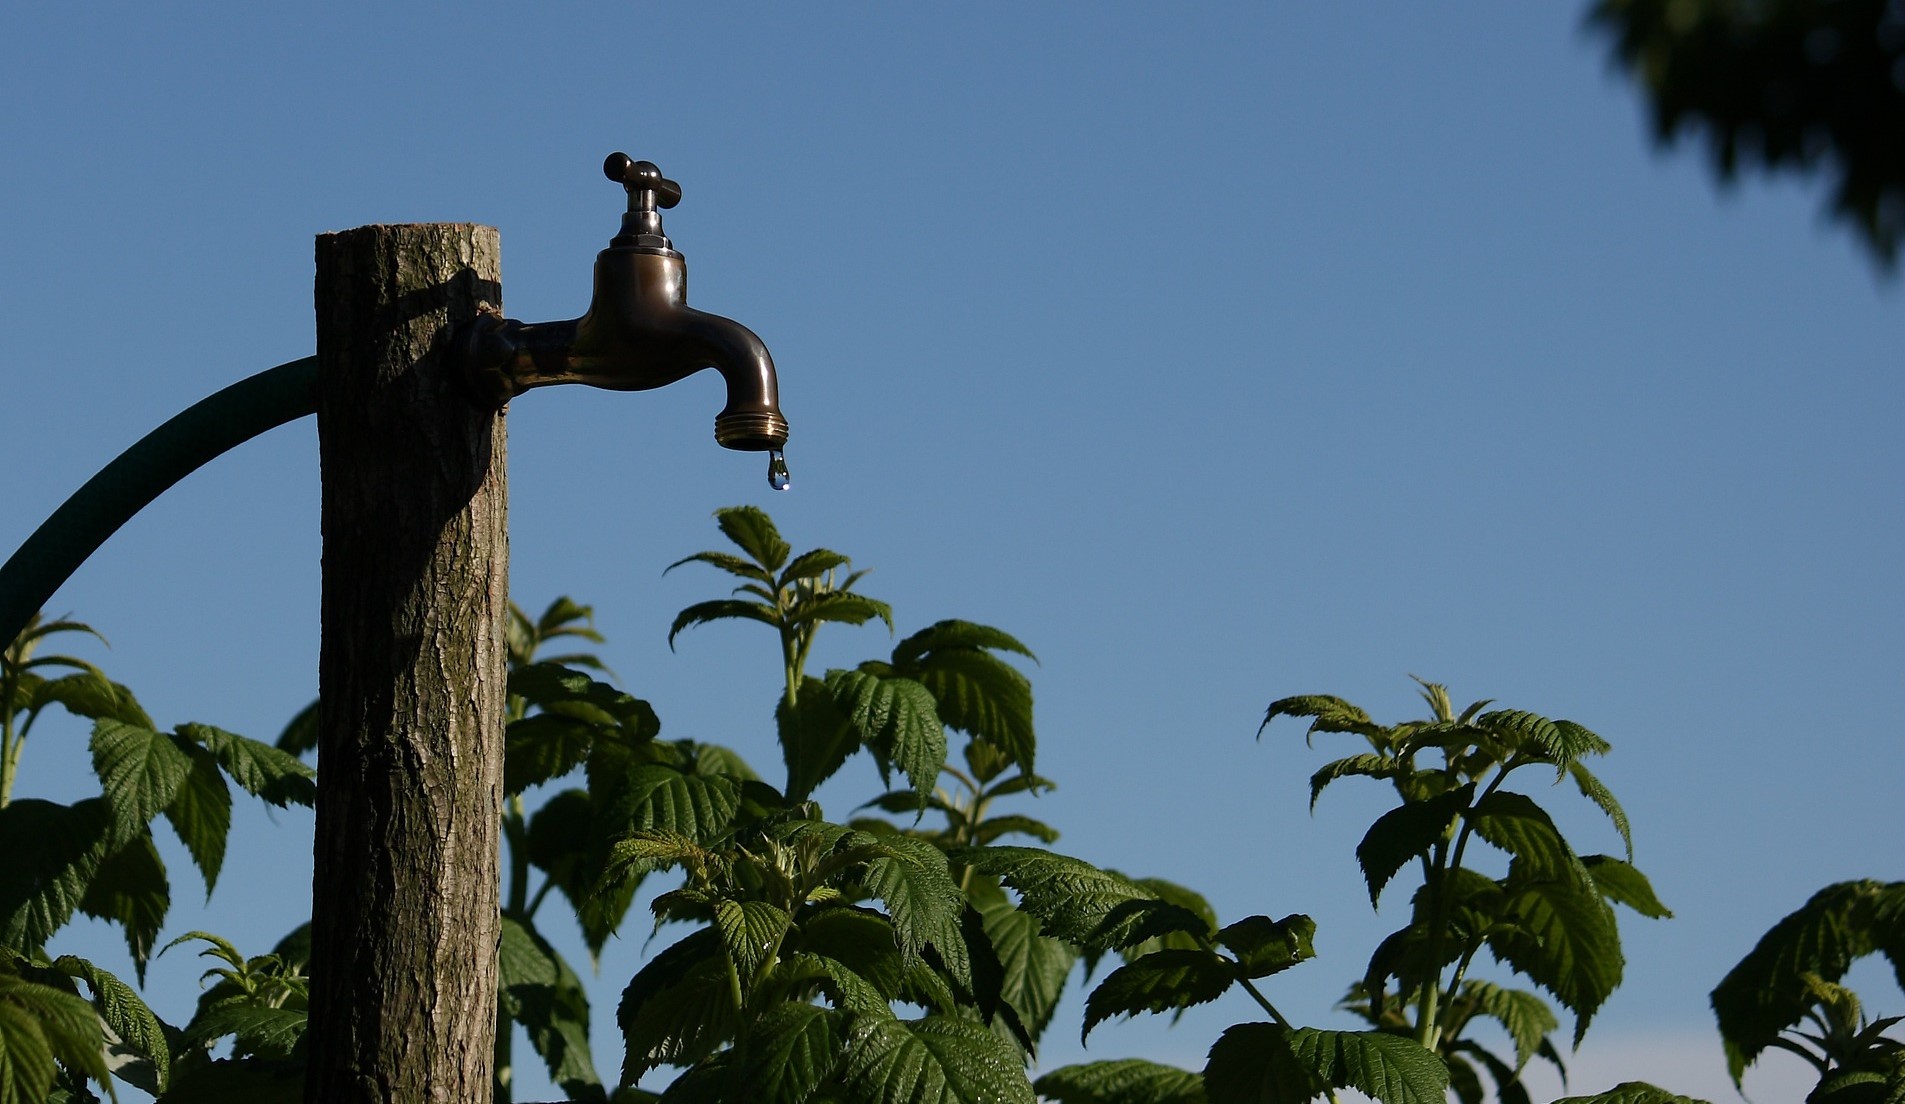 Rpresentational image of  a water tap next to plants. Photo credit: Pixabay